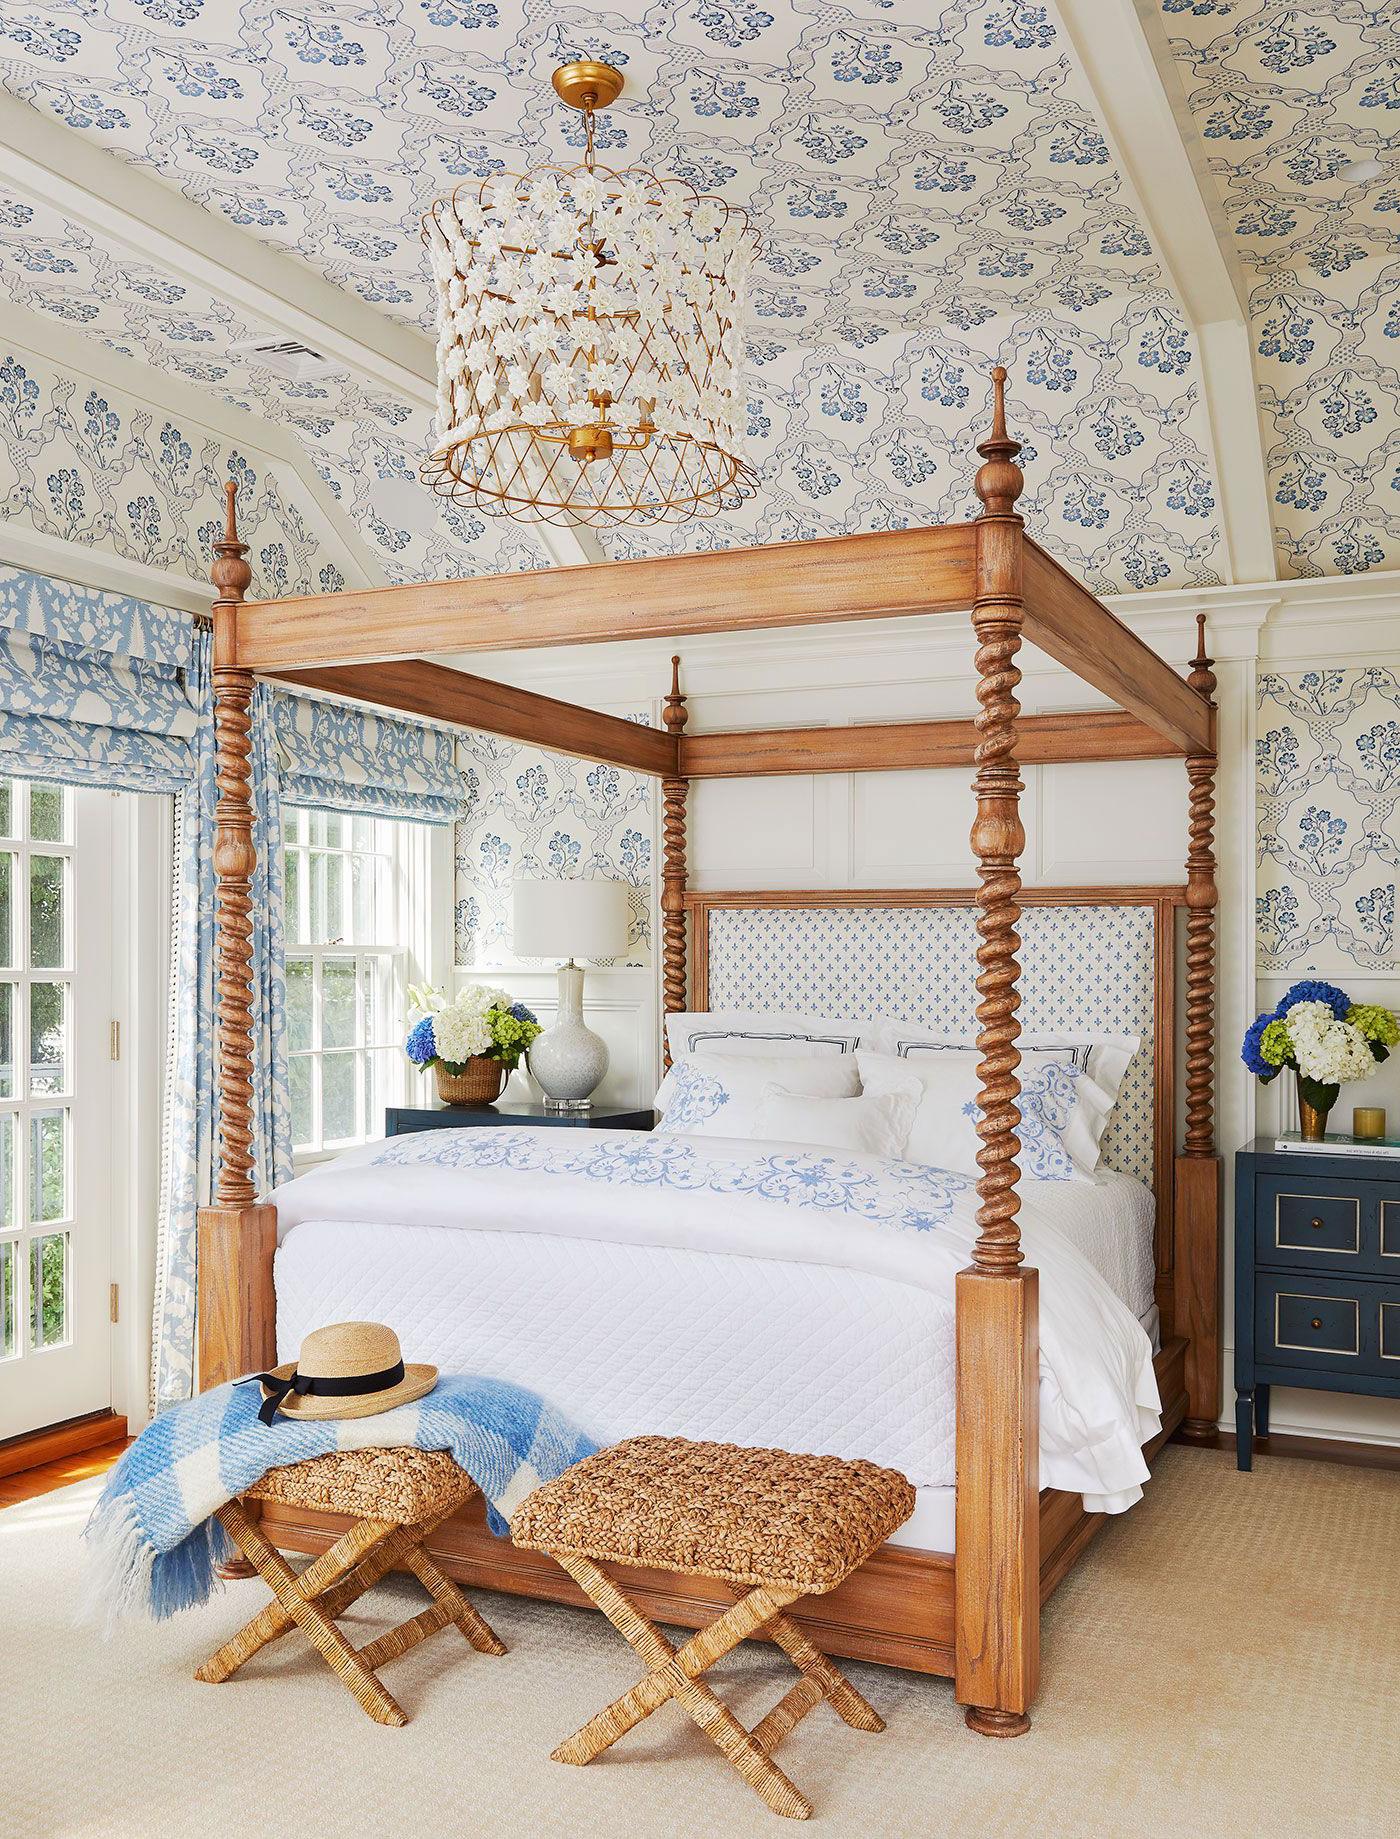 Bedroom with ceiling wallpaper and flower chandelier